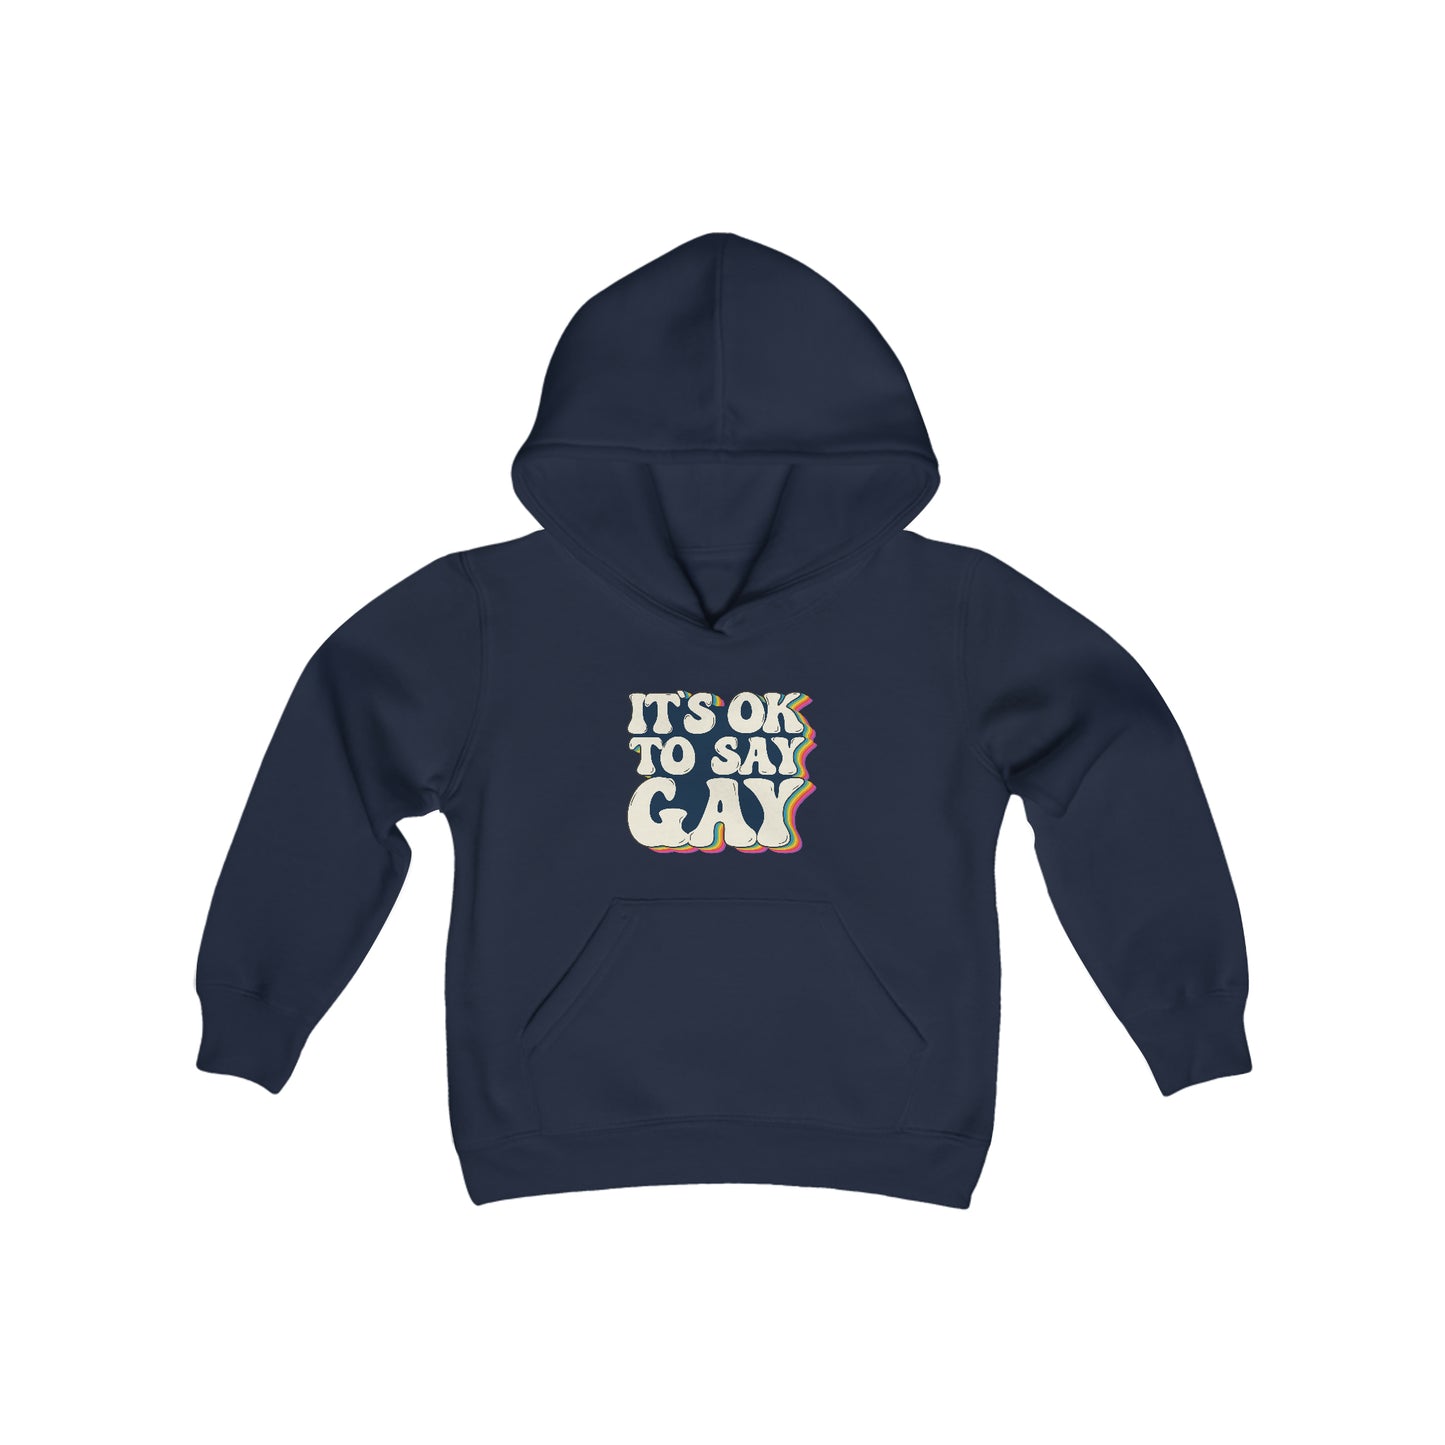 “It’s OK to Say Gay” Youth Hoodie